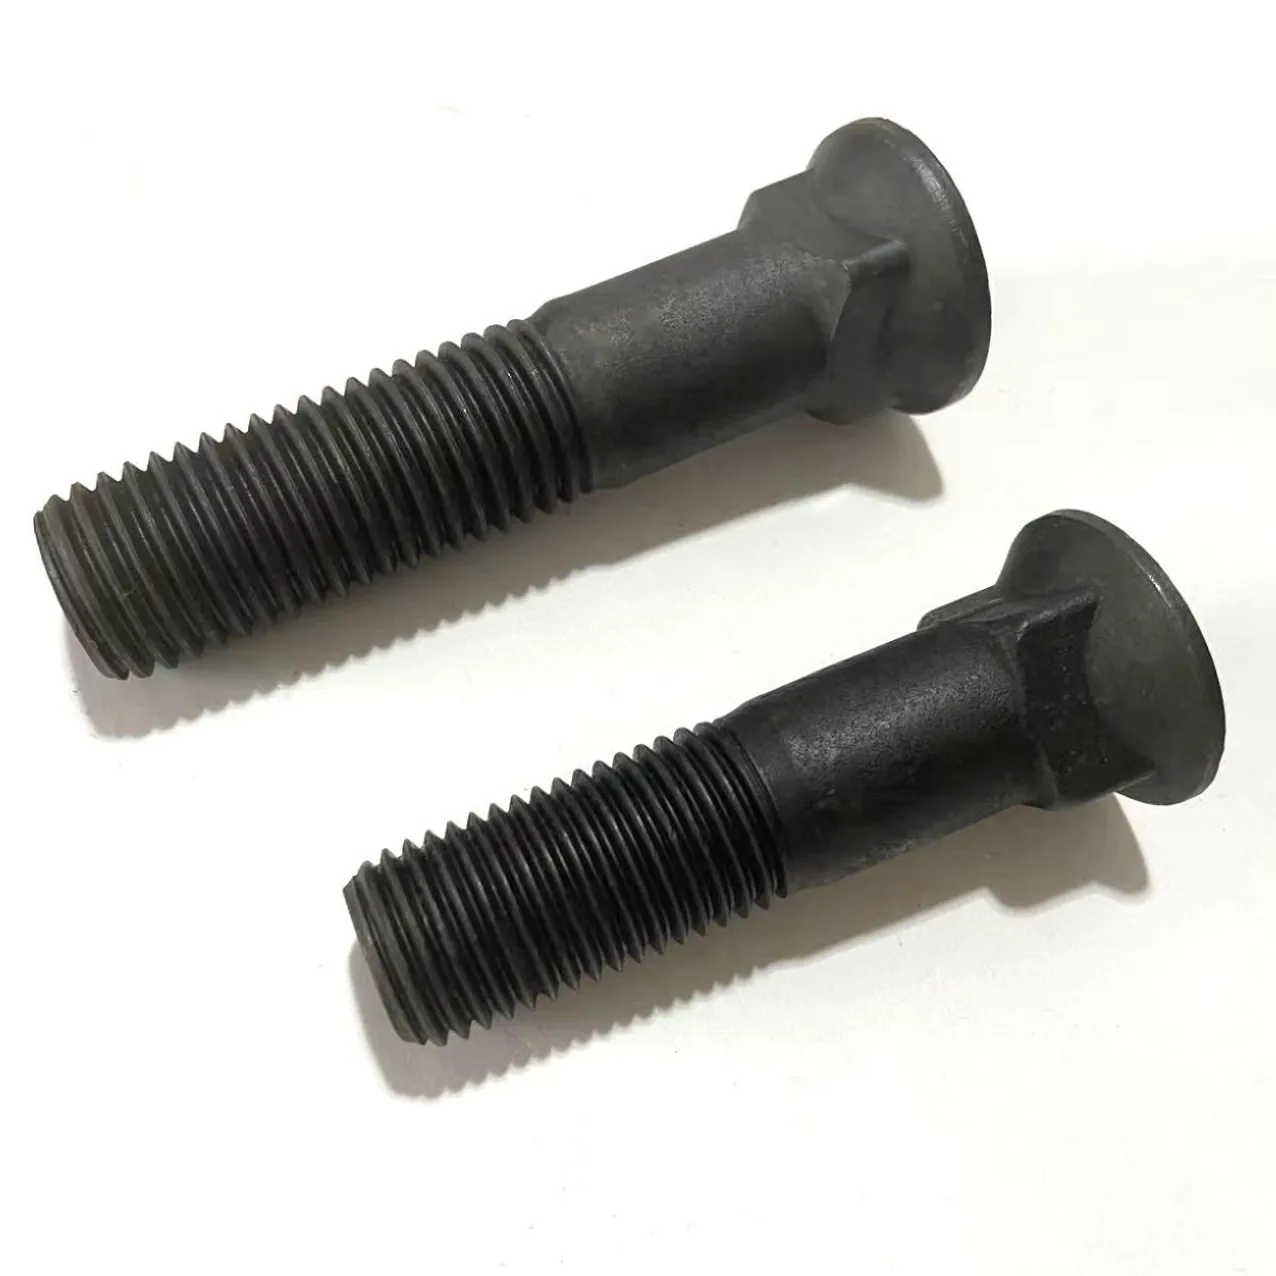 DIN608 M20 Flat Countersunk Head Square Neck Plow bolts